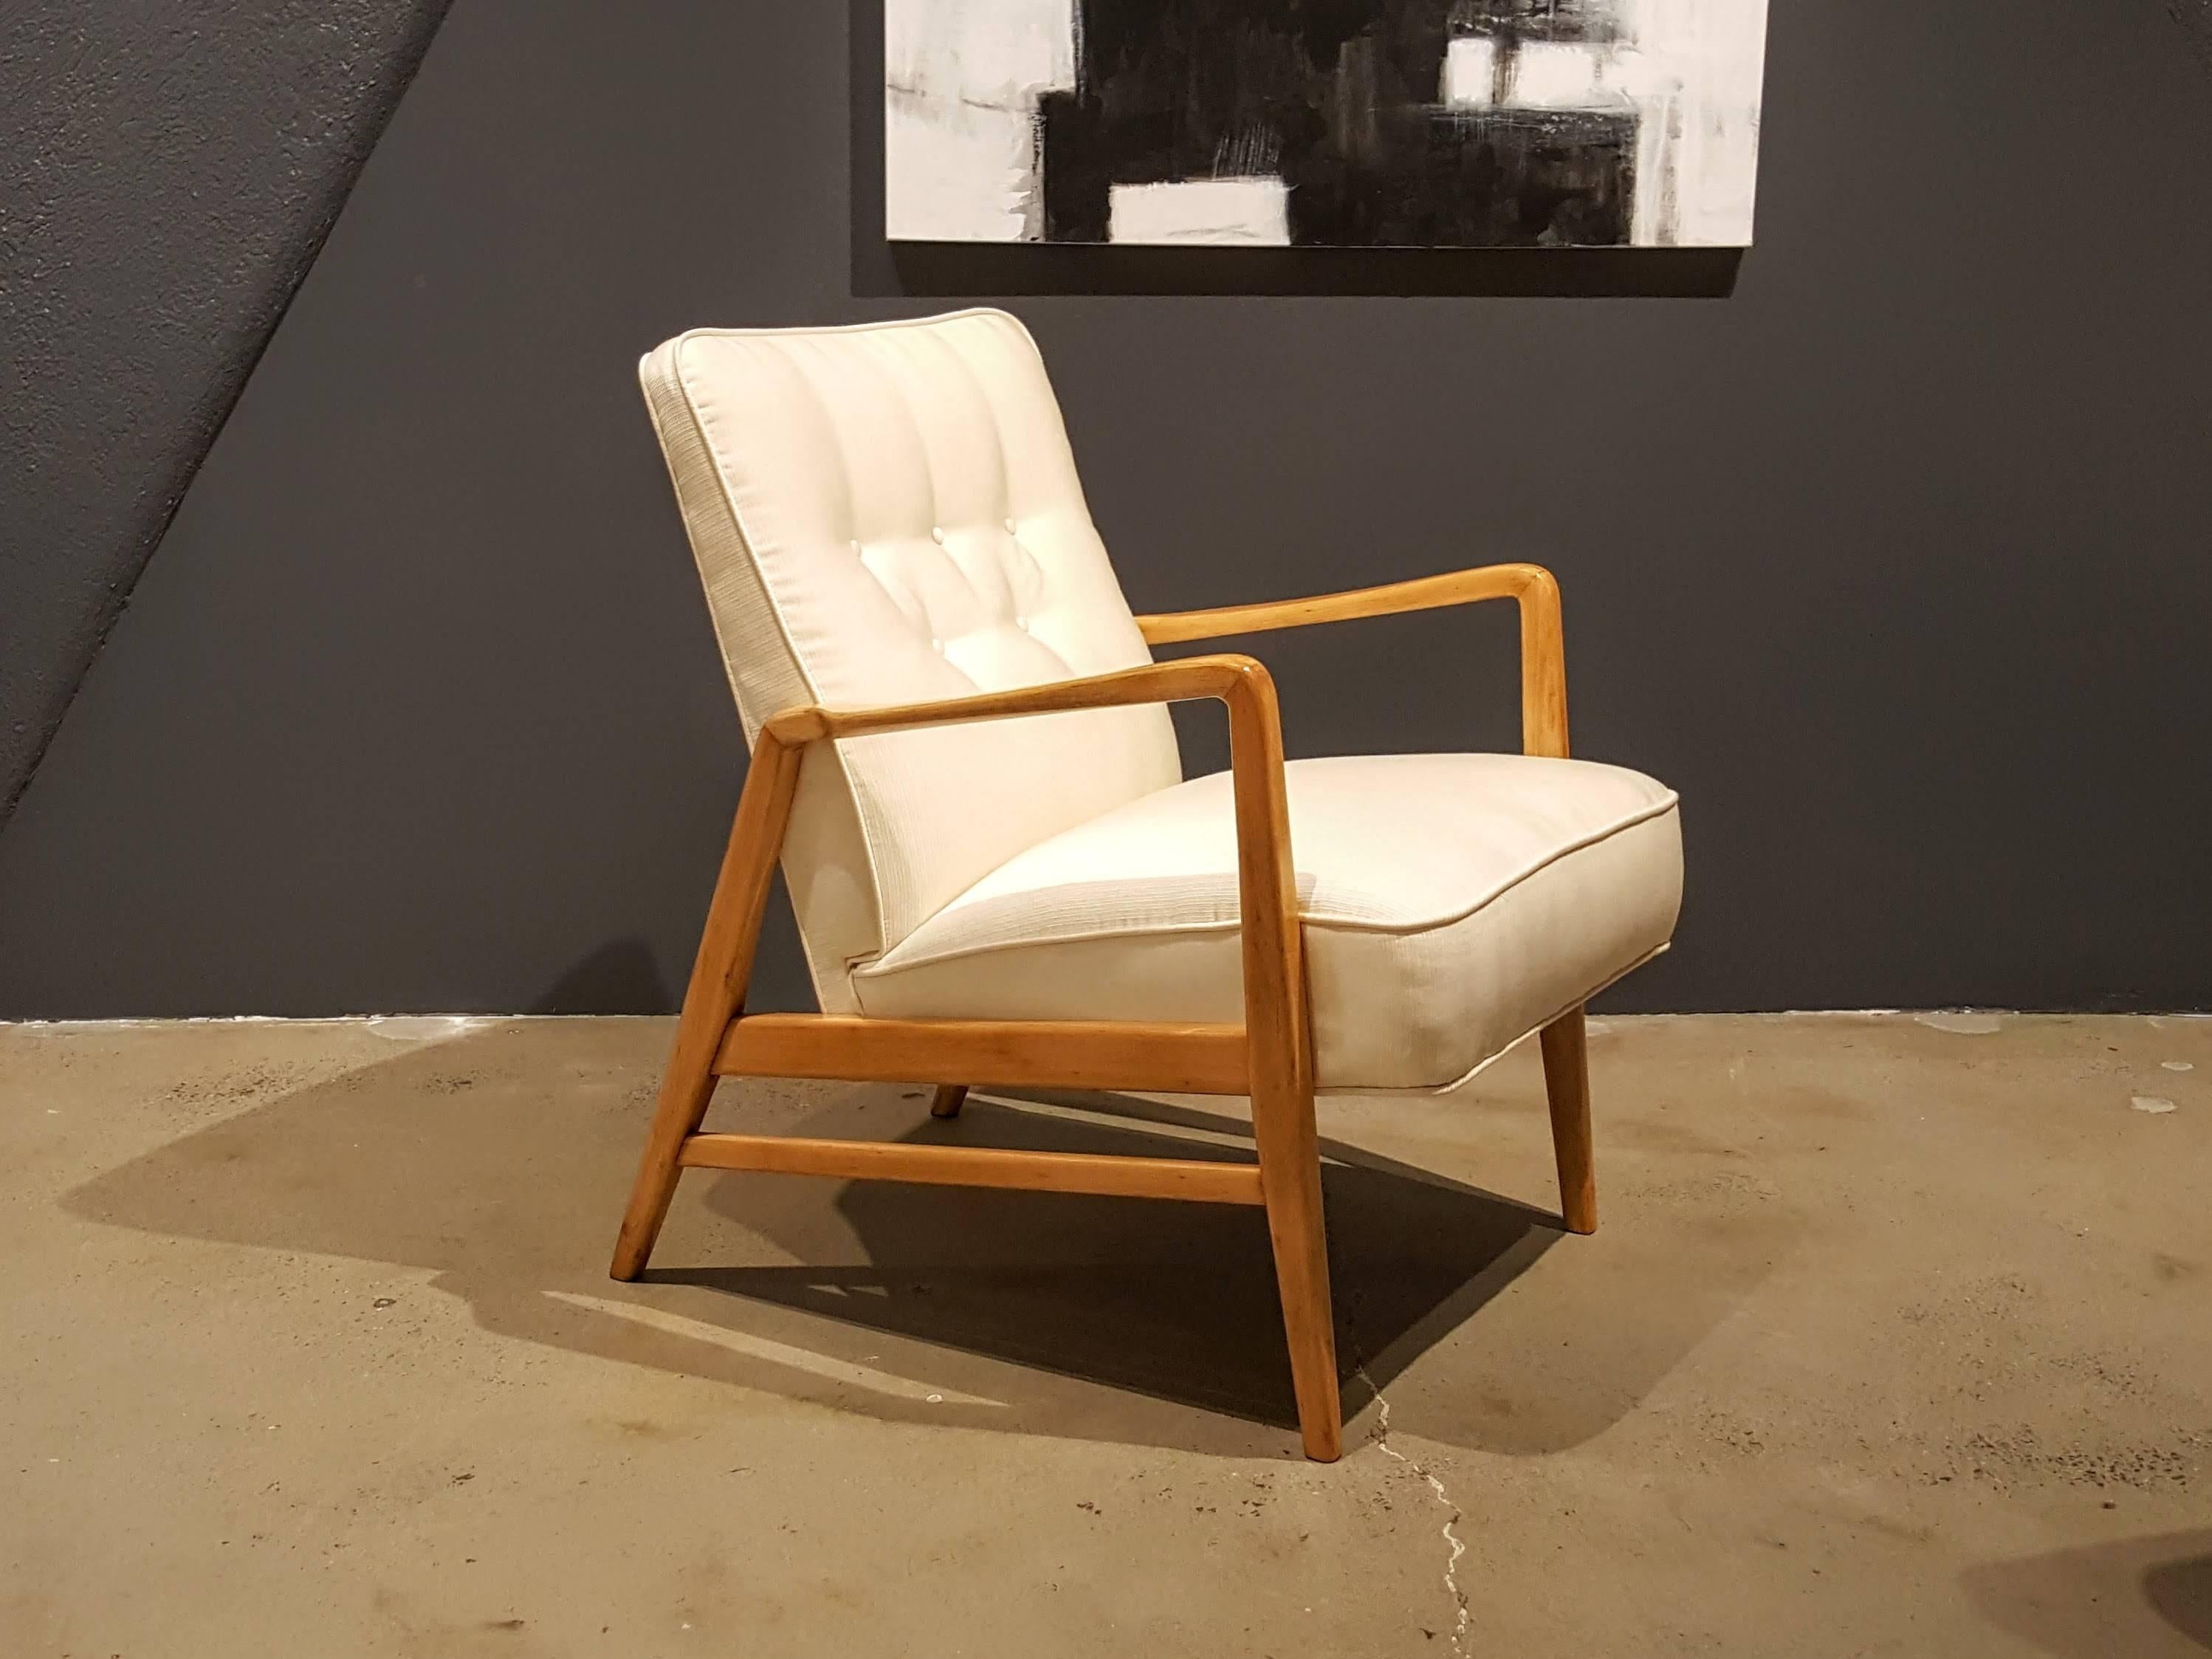 Early and rare high back DUX lounge chair by Folke Olhsson for DUX, 1950s. A wonderful accent or reading chair. Fully restored and in excellent condition. Upholstered in a ribbed upholstery wool blend.